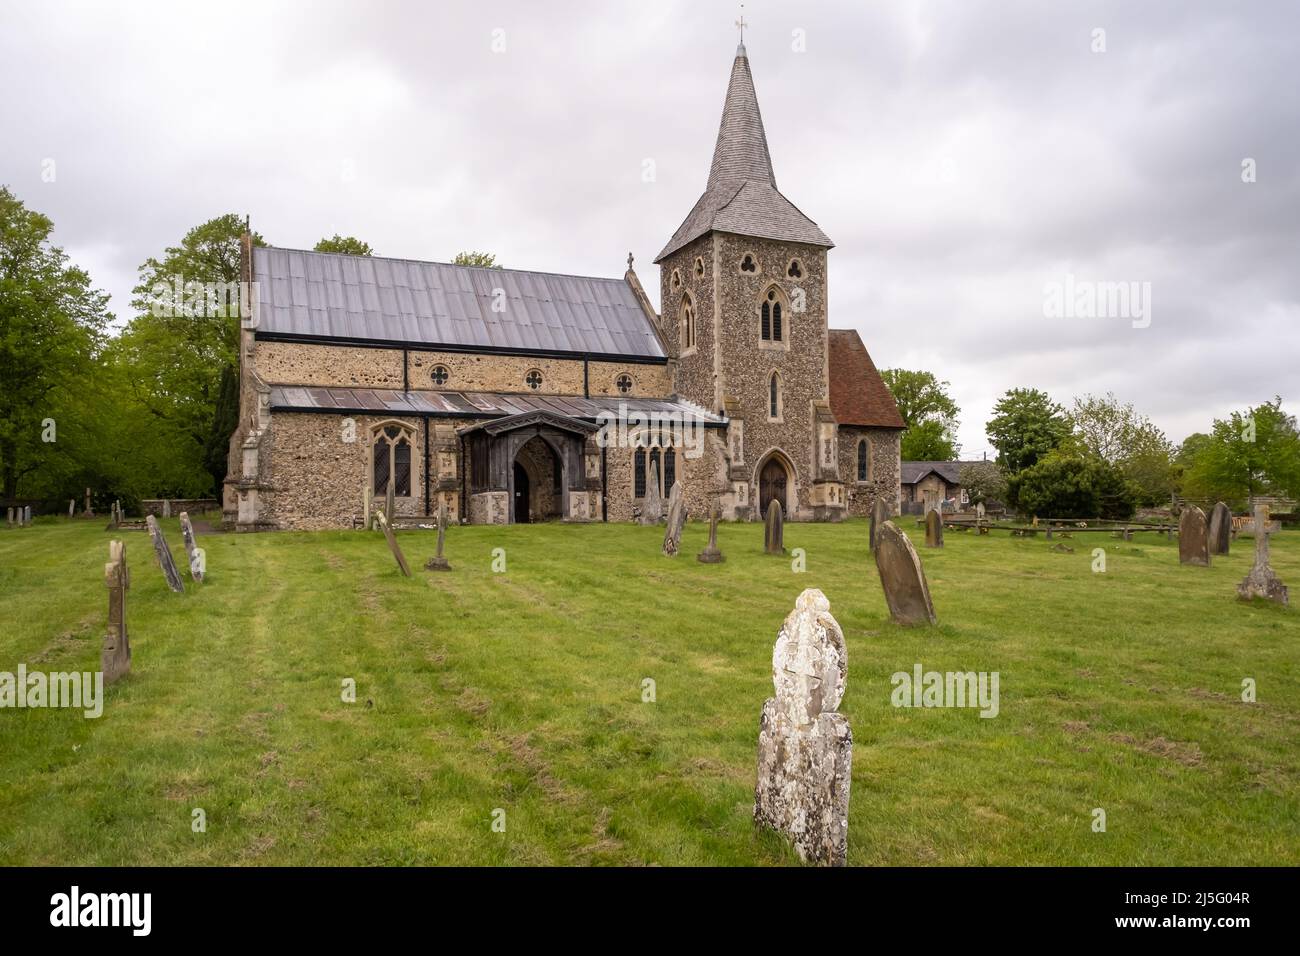 The parish church of All Saints in the Essex village of Sisted. Stock Photo